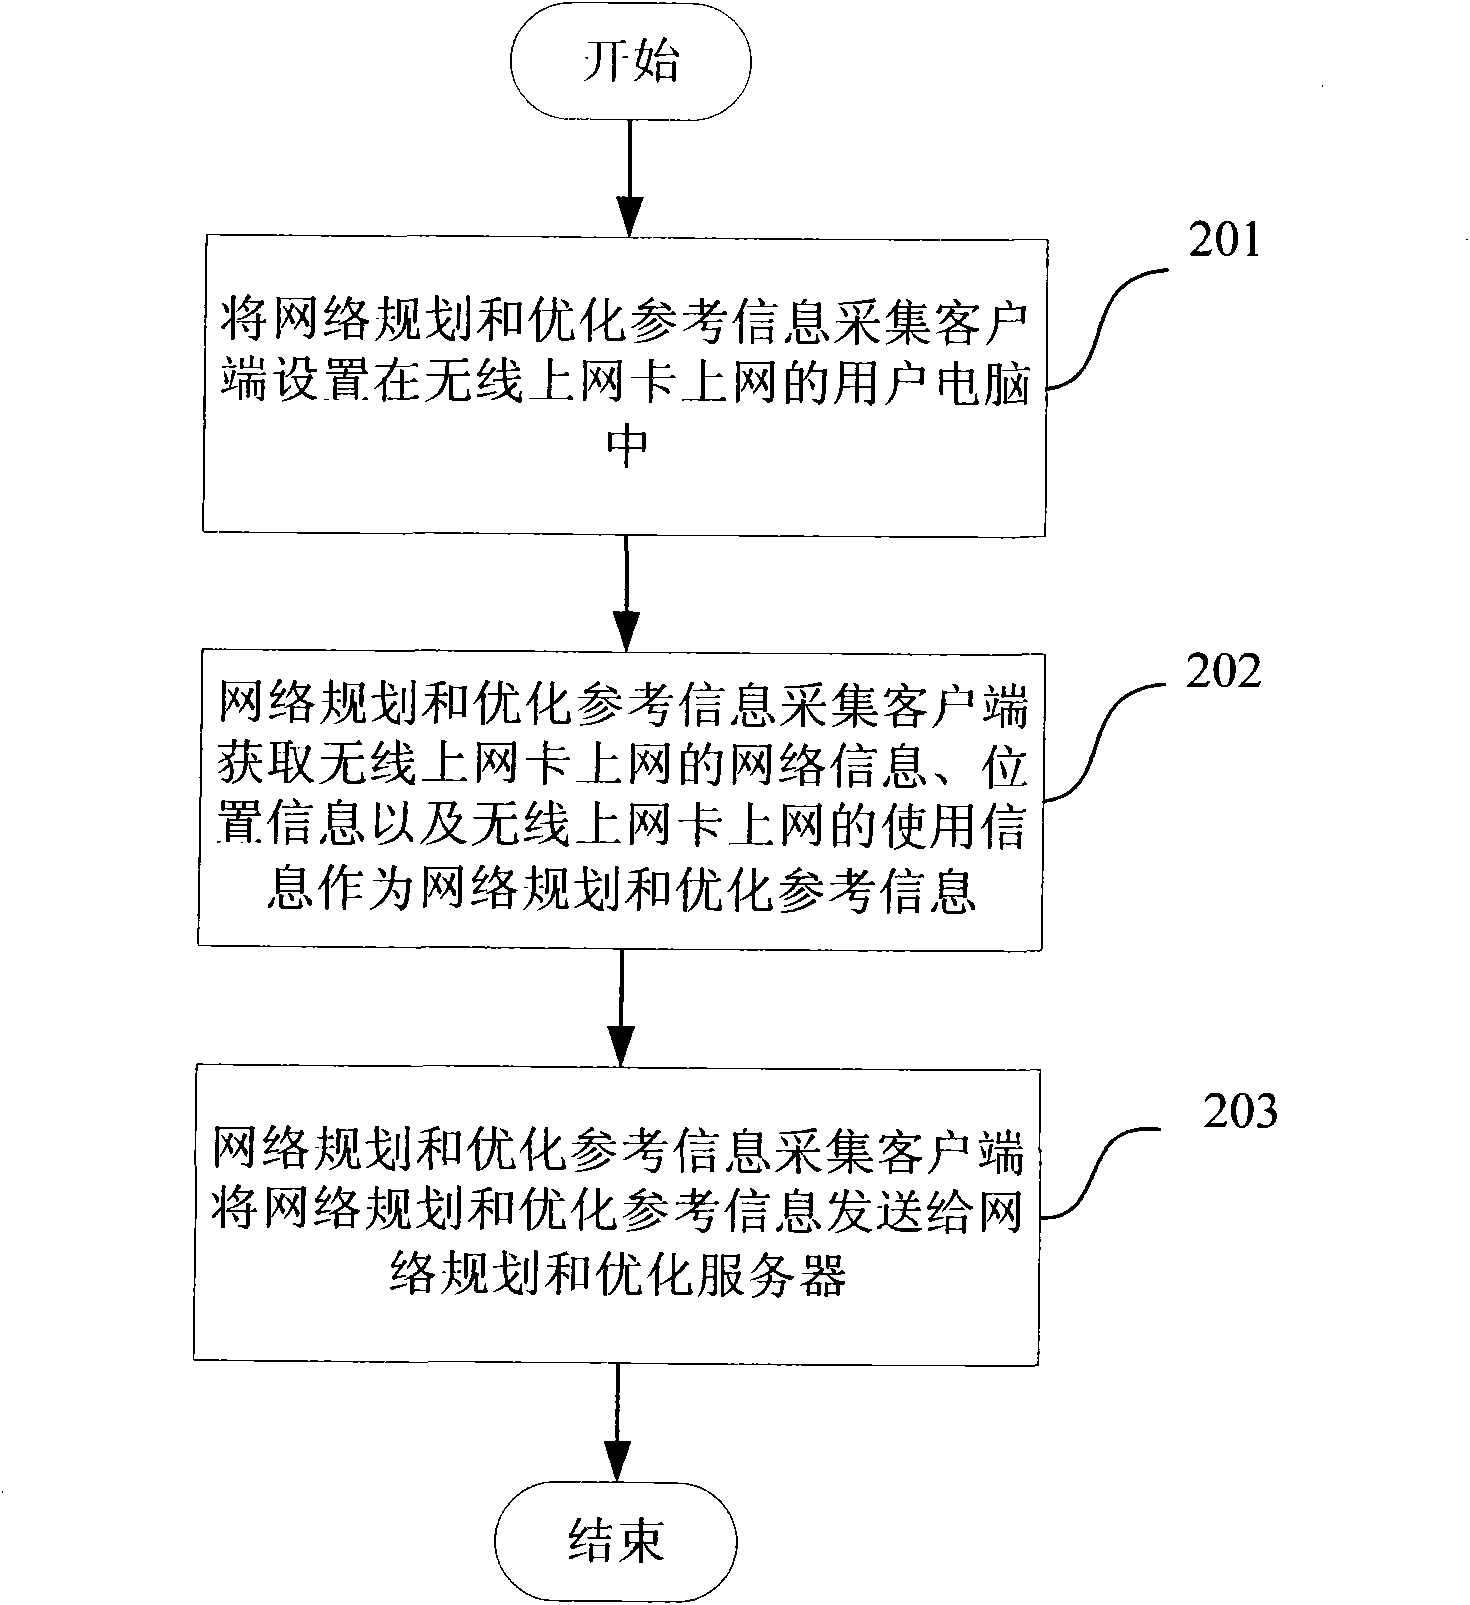 Method and system for collecting network programming and optimizing reference information